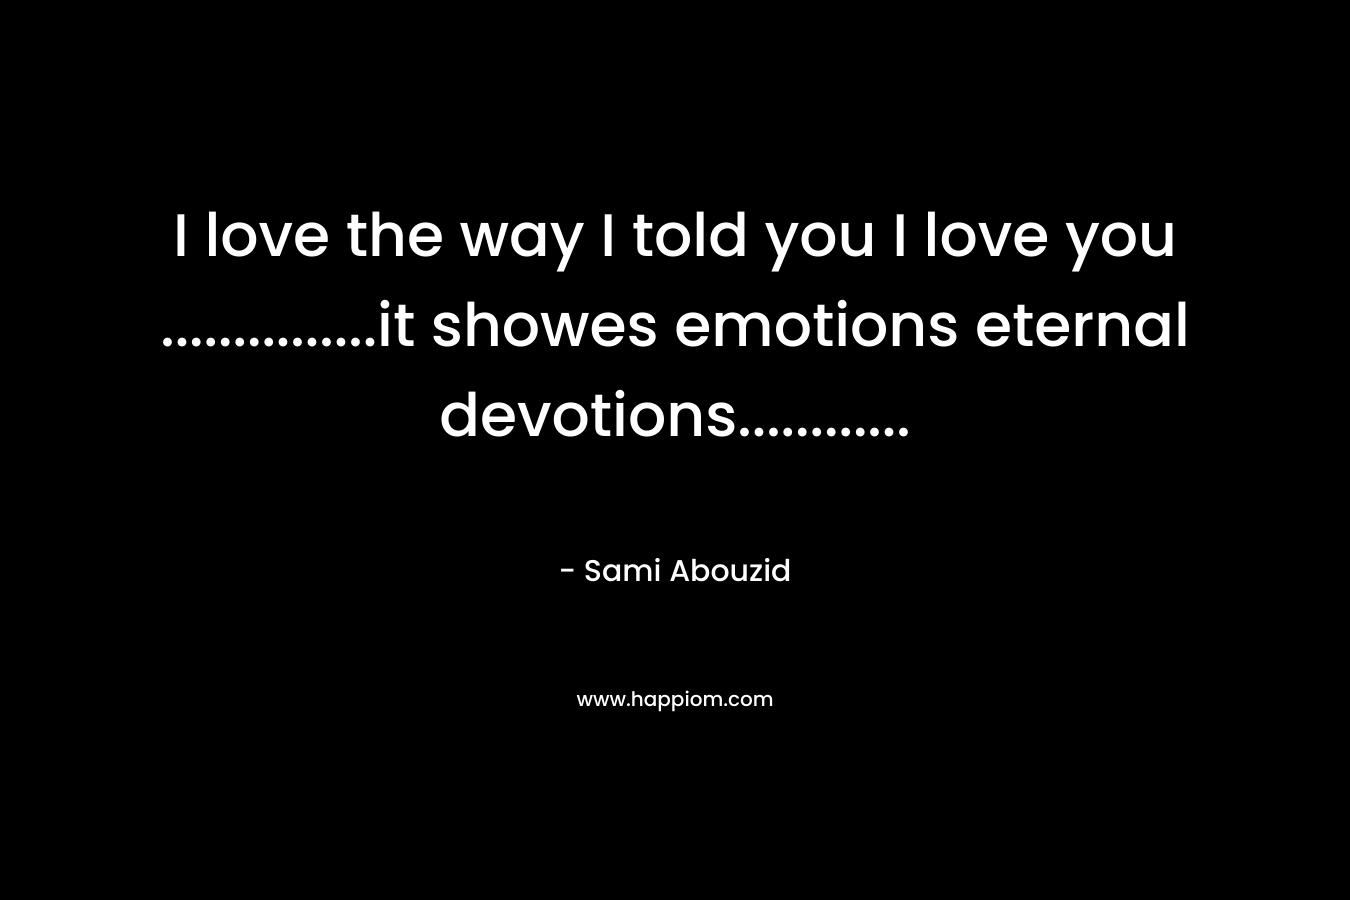 I love the way I told you I love you ...............it showes emotions eternal devotions............